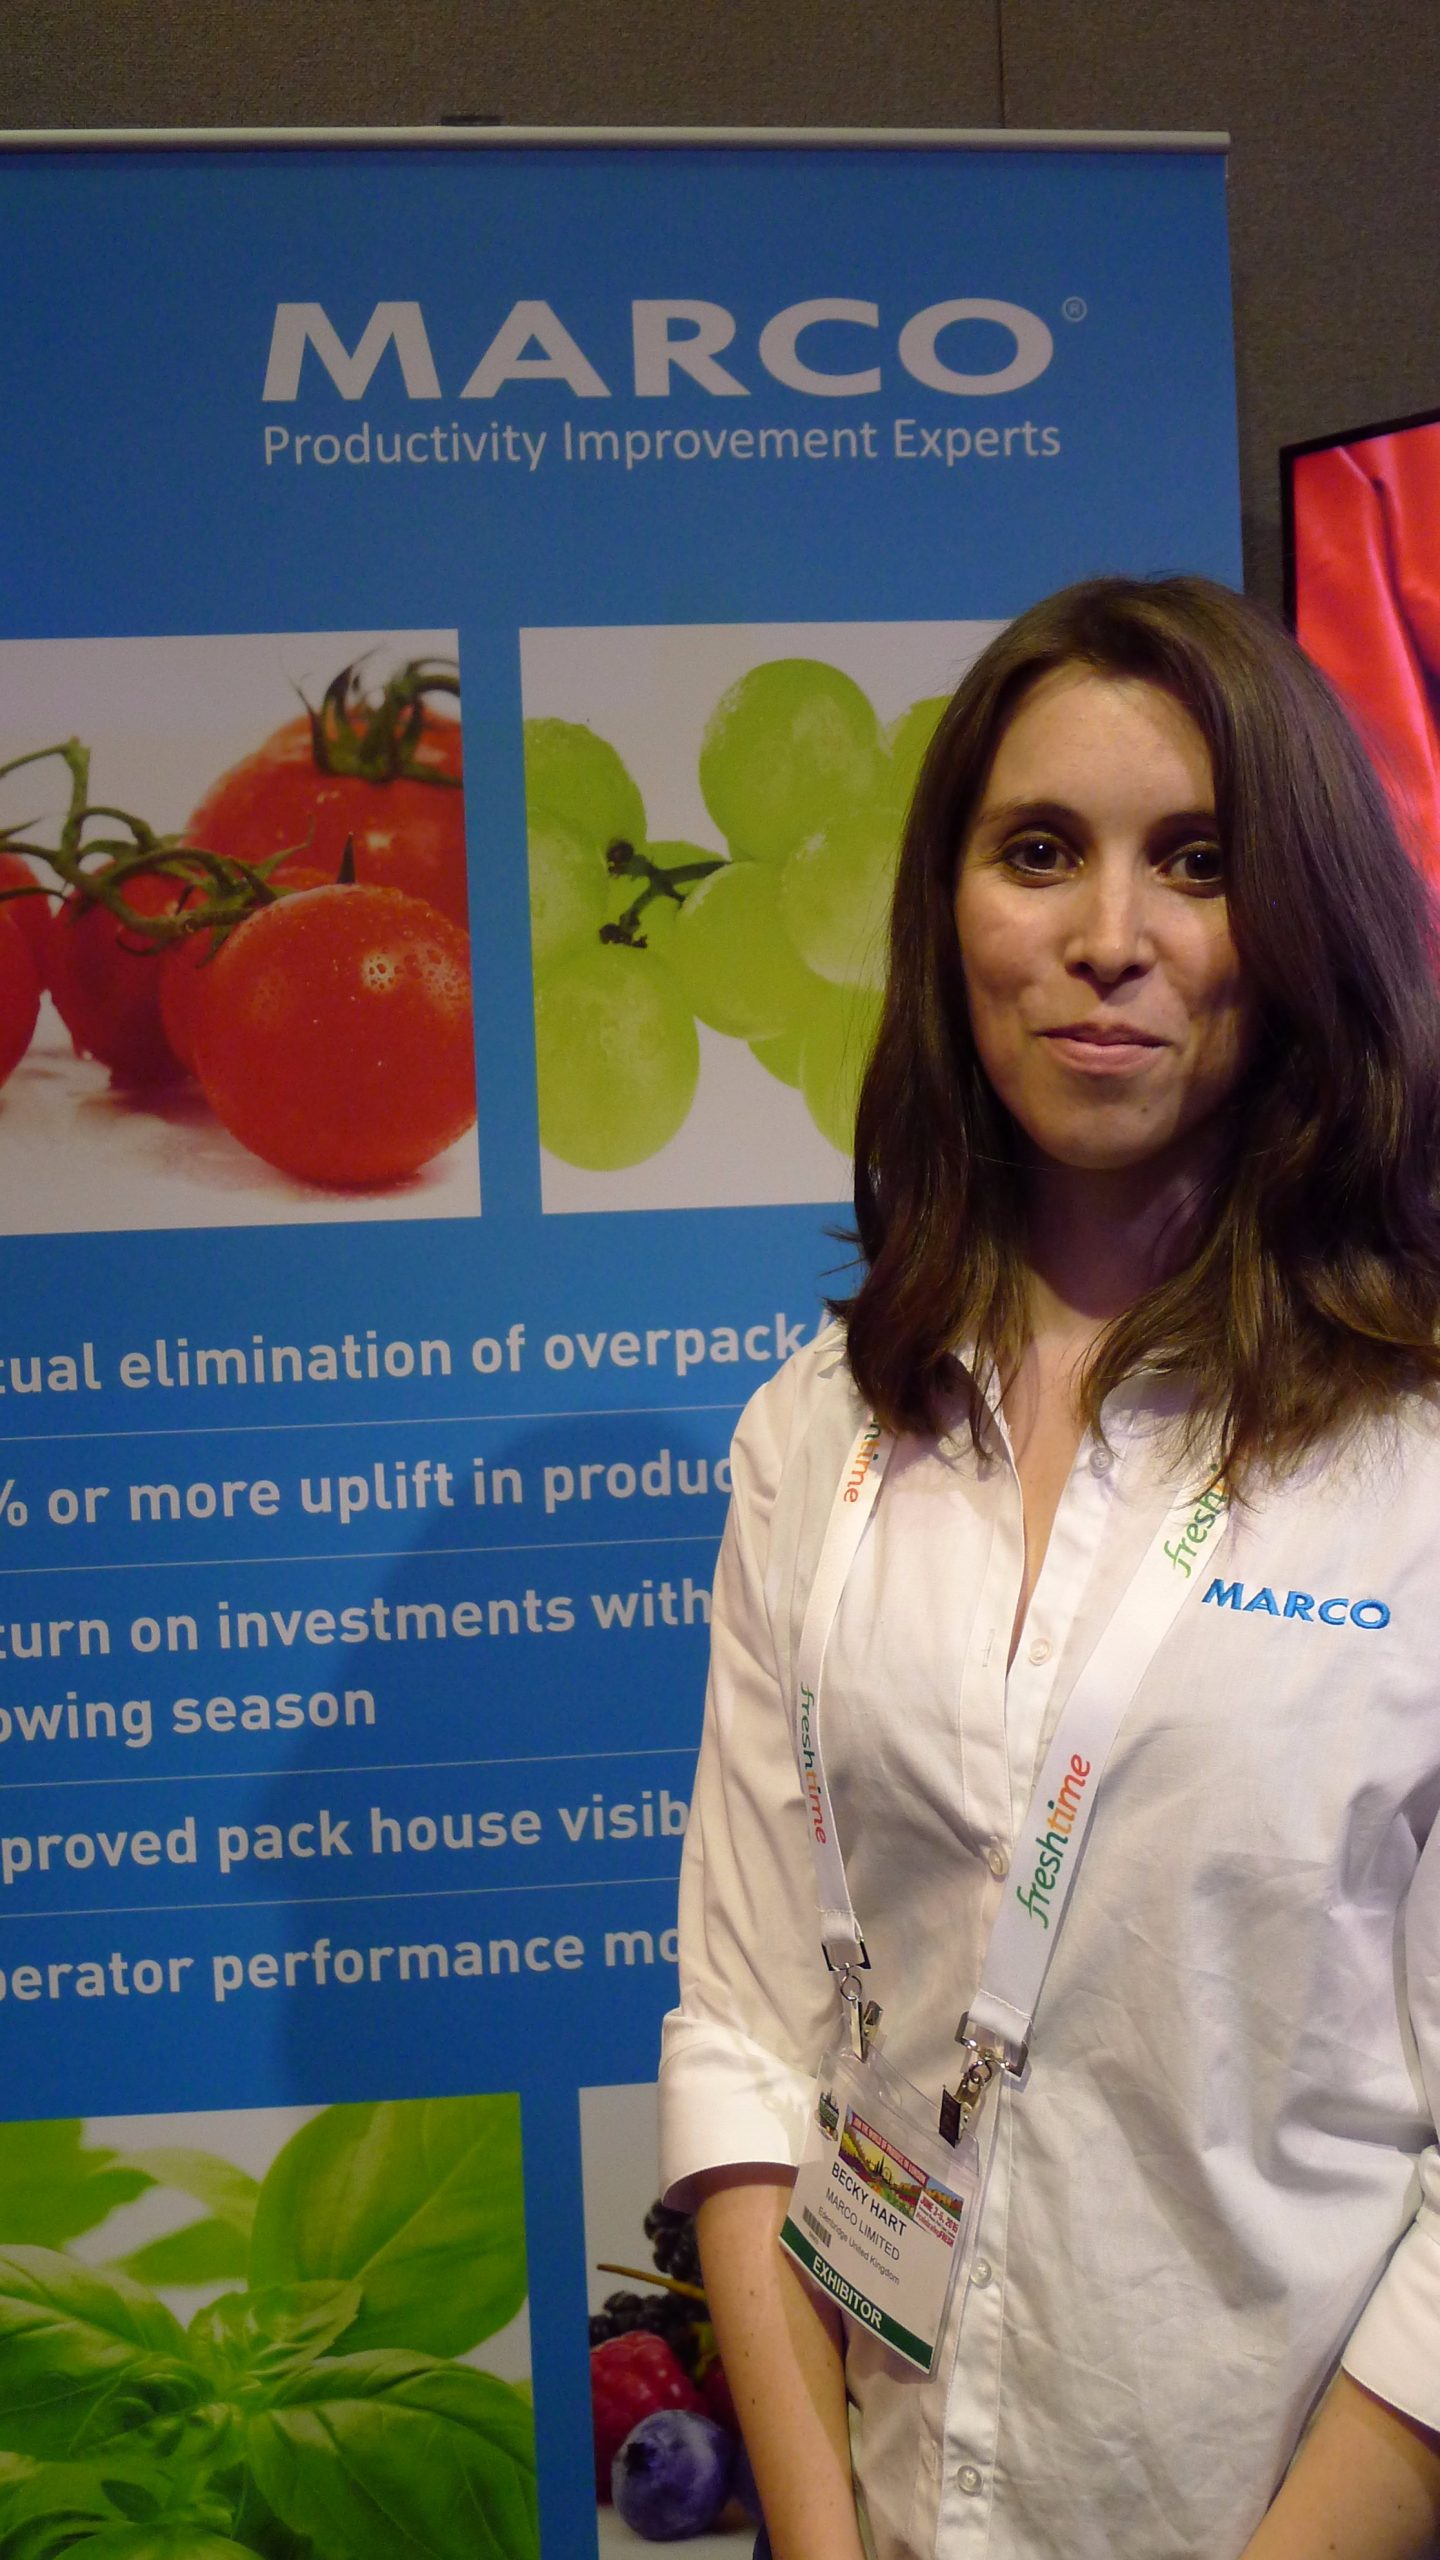 Among the hardware and software products Marco was promoting at the show were its Field Side Packing solution, which allows producer who don’t have dedicated pack houses to nevertheless meet retailers’ demand for accurately declared weights on pre-packed produce.